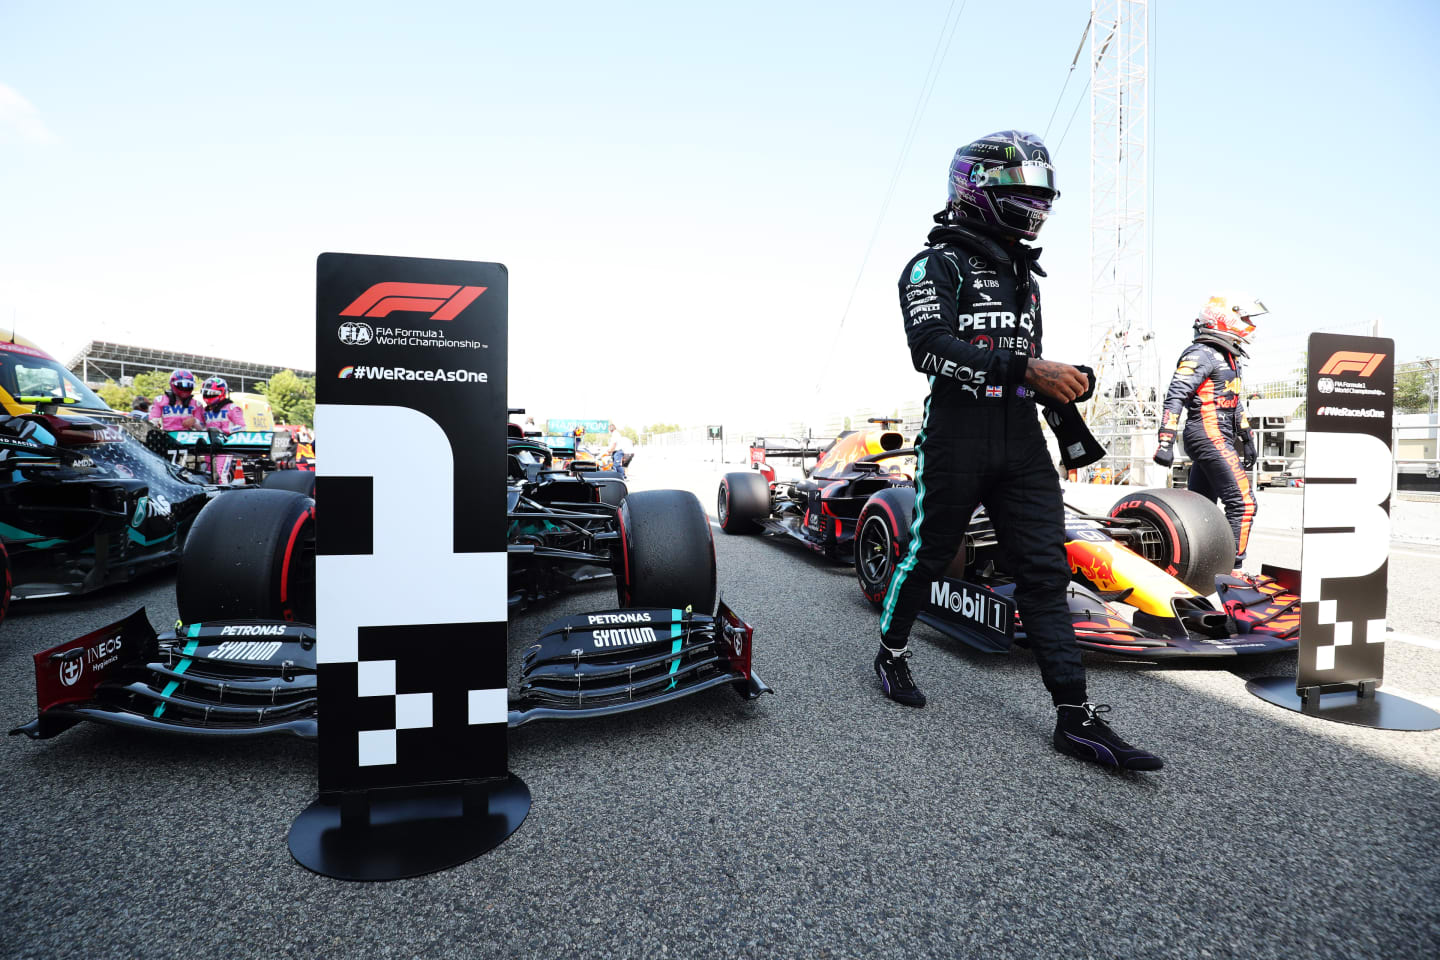 BARCELONA, SPAIN - AUGUST 15: Pole position qualifier Lewis Hamilton of Great Britain and Mercedes